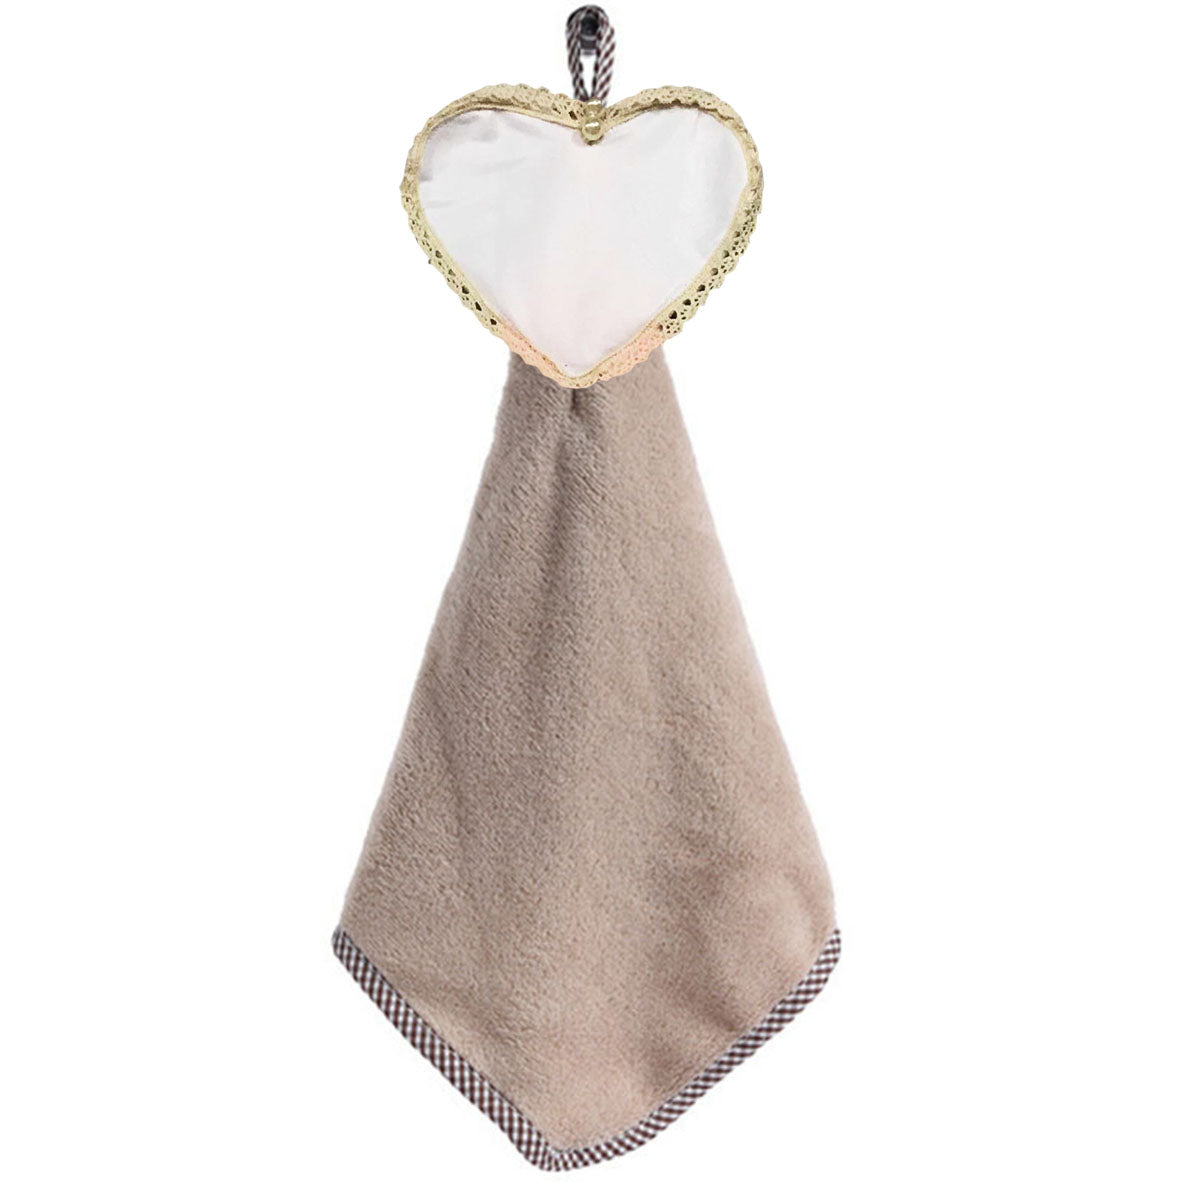 TW2 Personalised Hand Towel Heart Printing For Kid Microfiber Hand Dry Towel Home Decor (Brown)